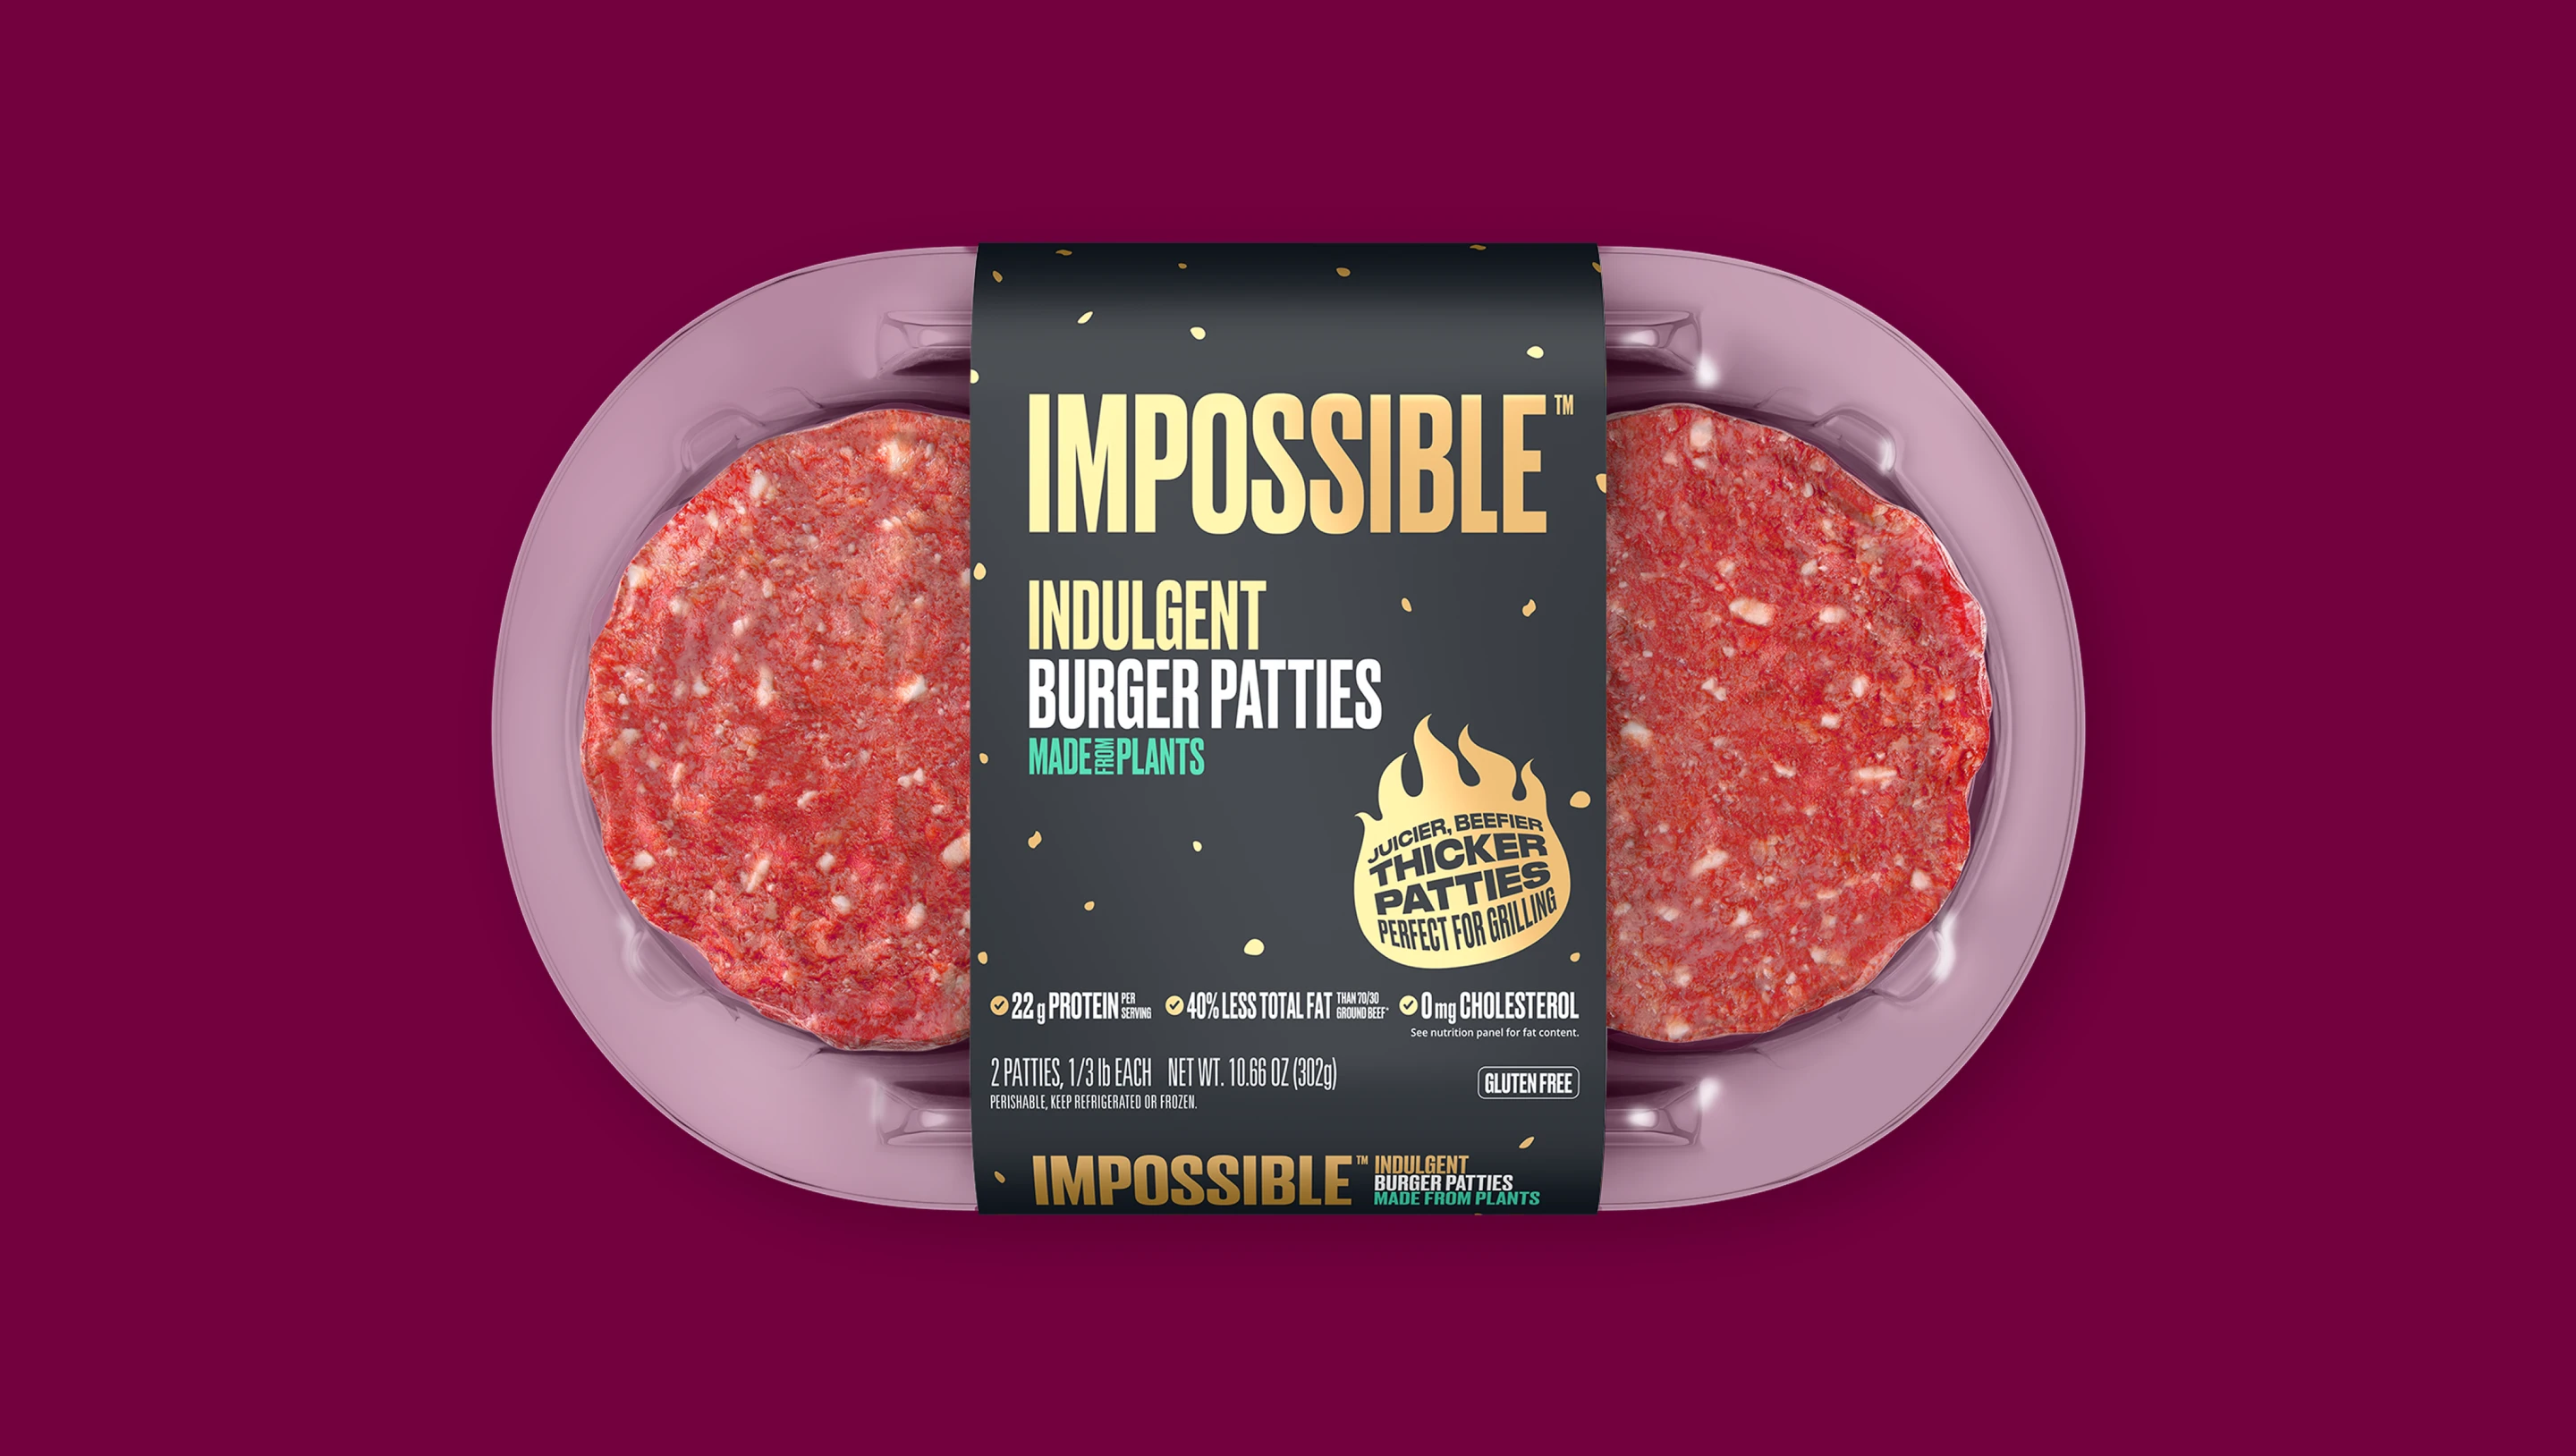 Indulgent burger patty pack, front of product packaging